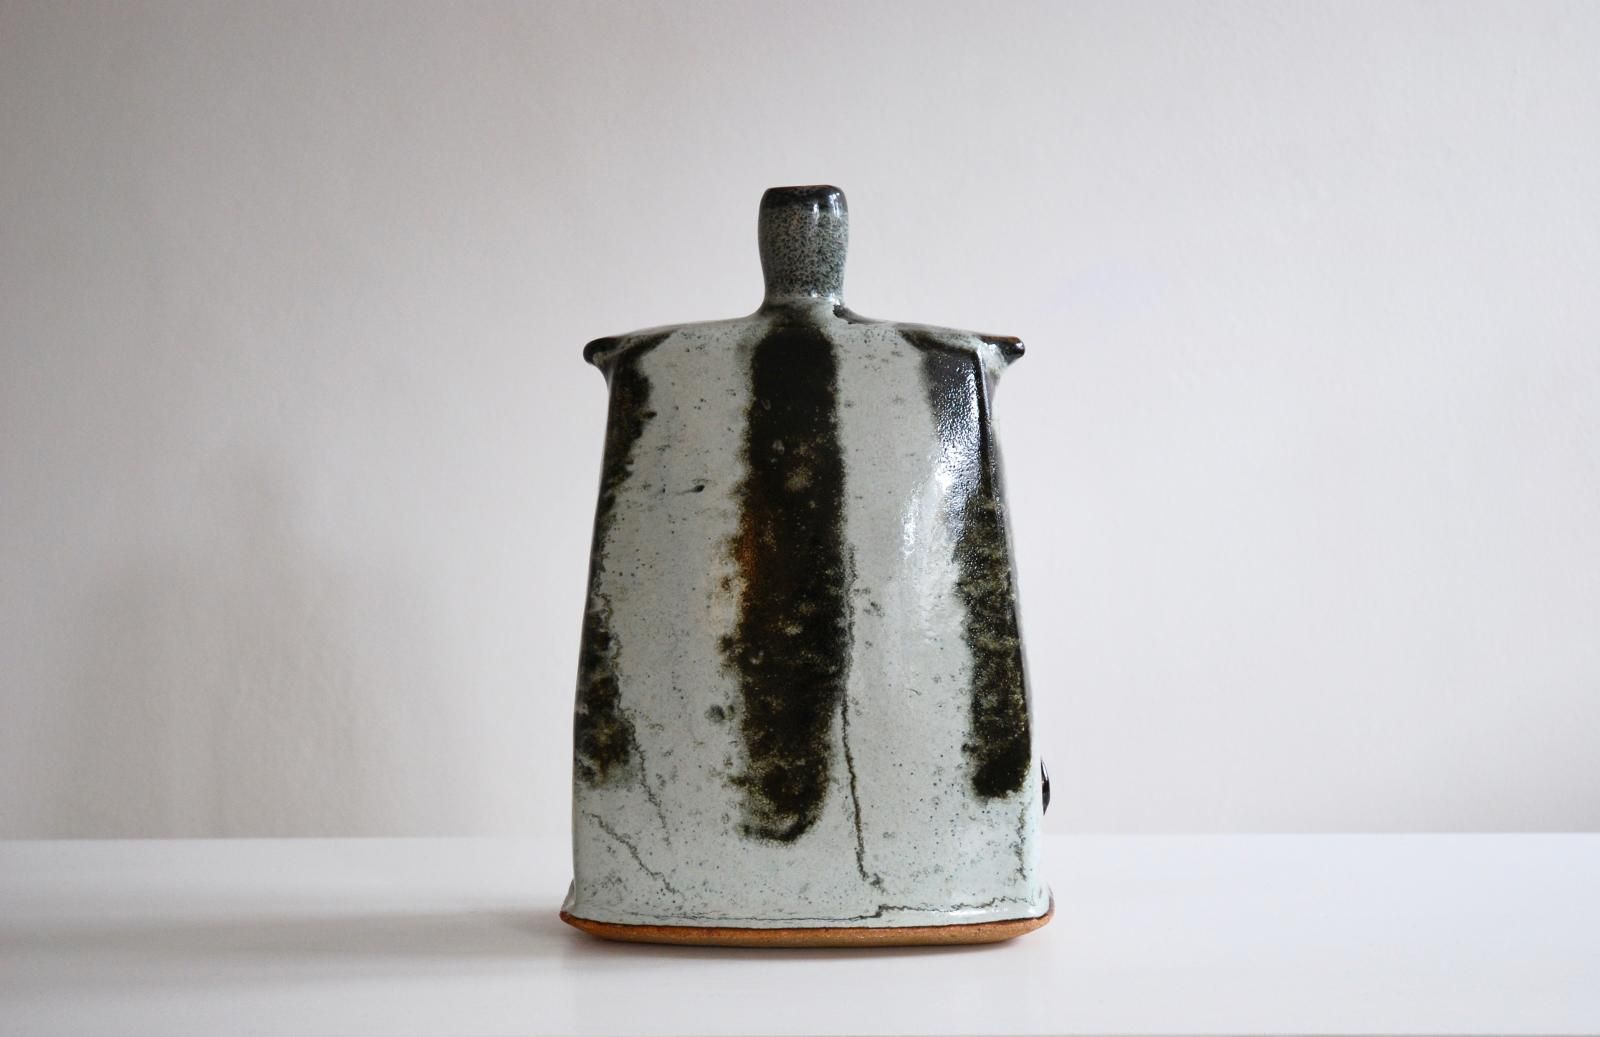 Large thrown and altered vase by James Hake